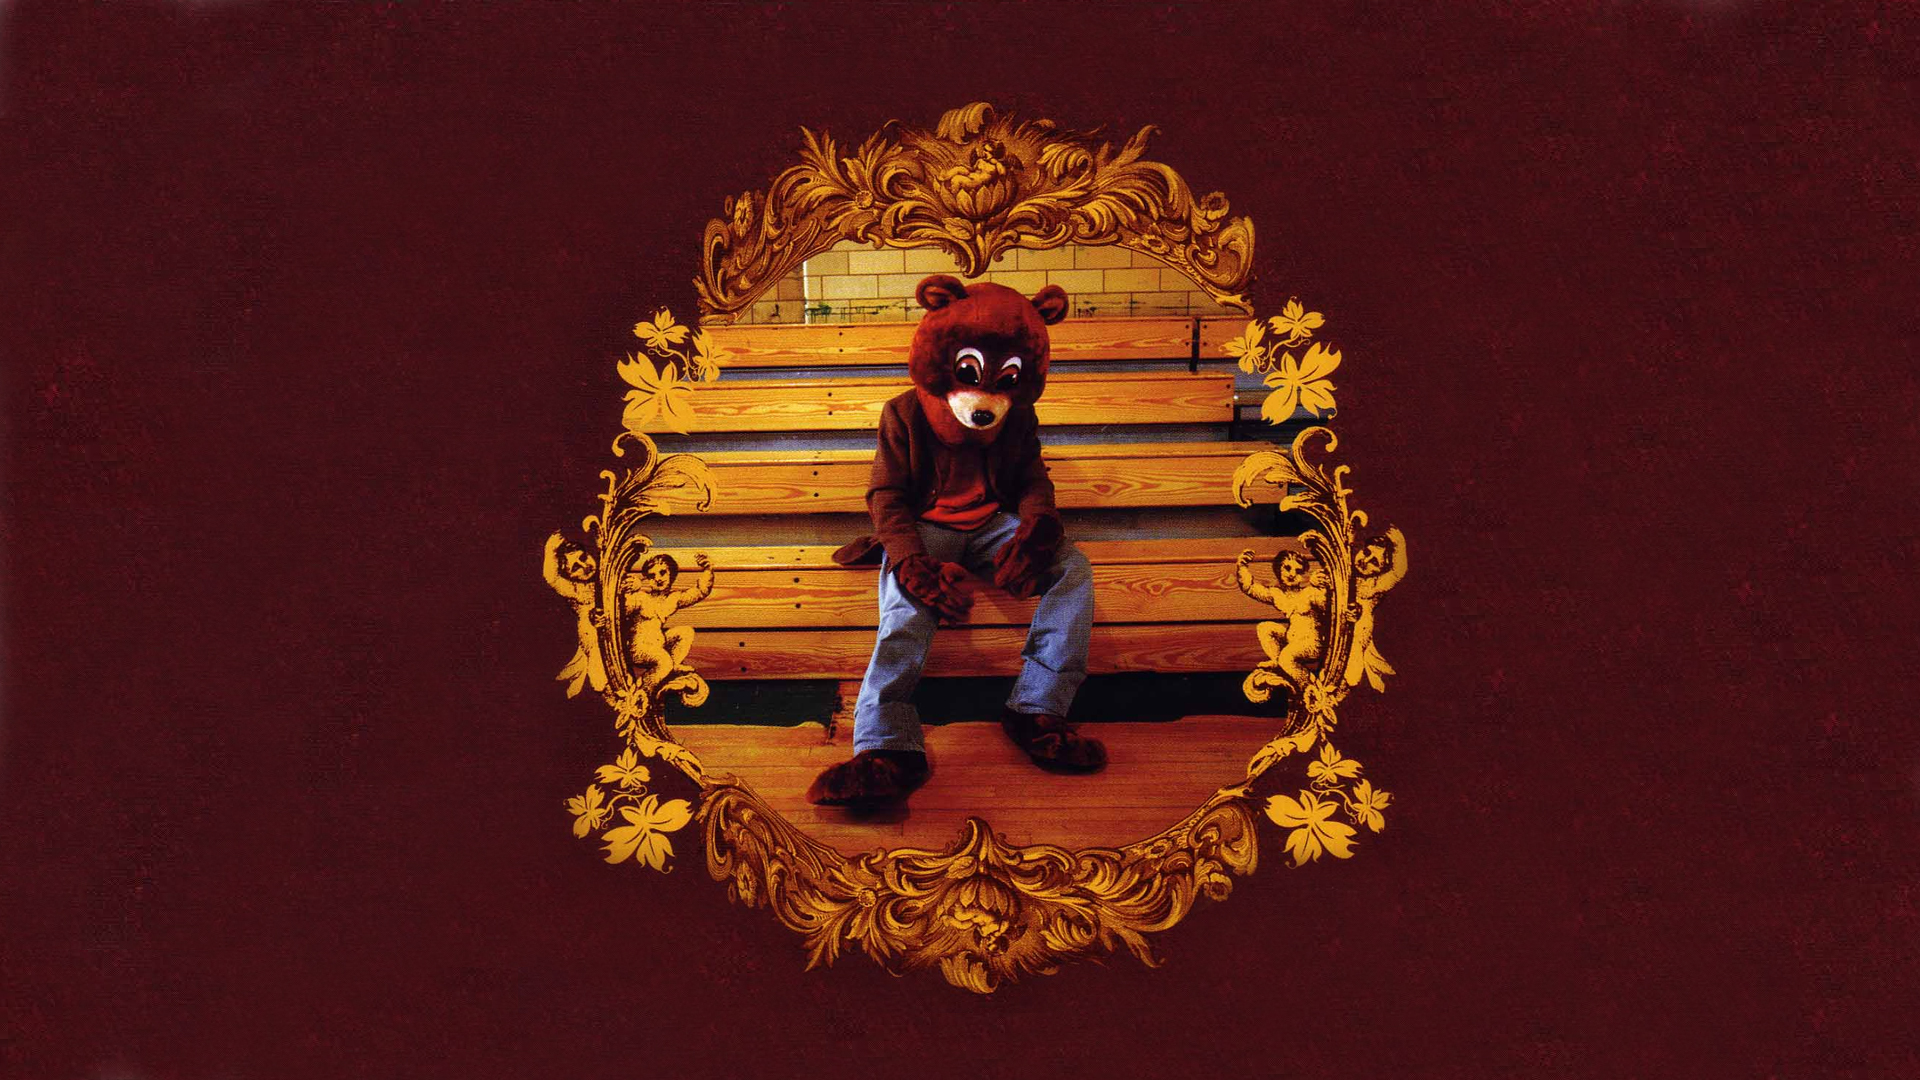 OKC.NET | Kanye West The College Dropout